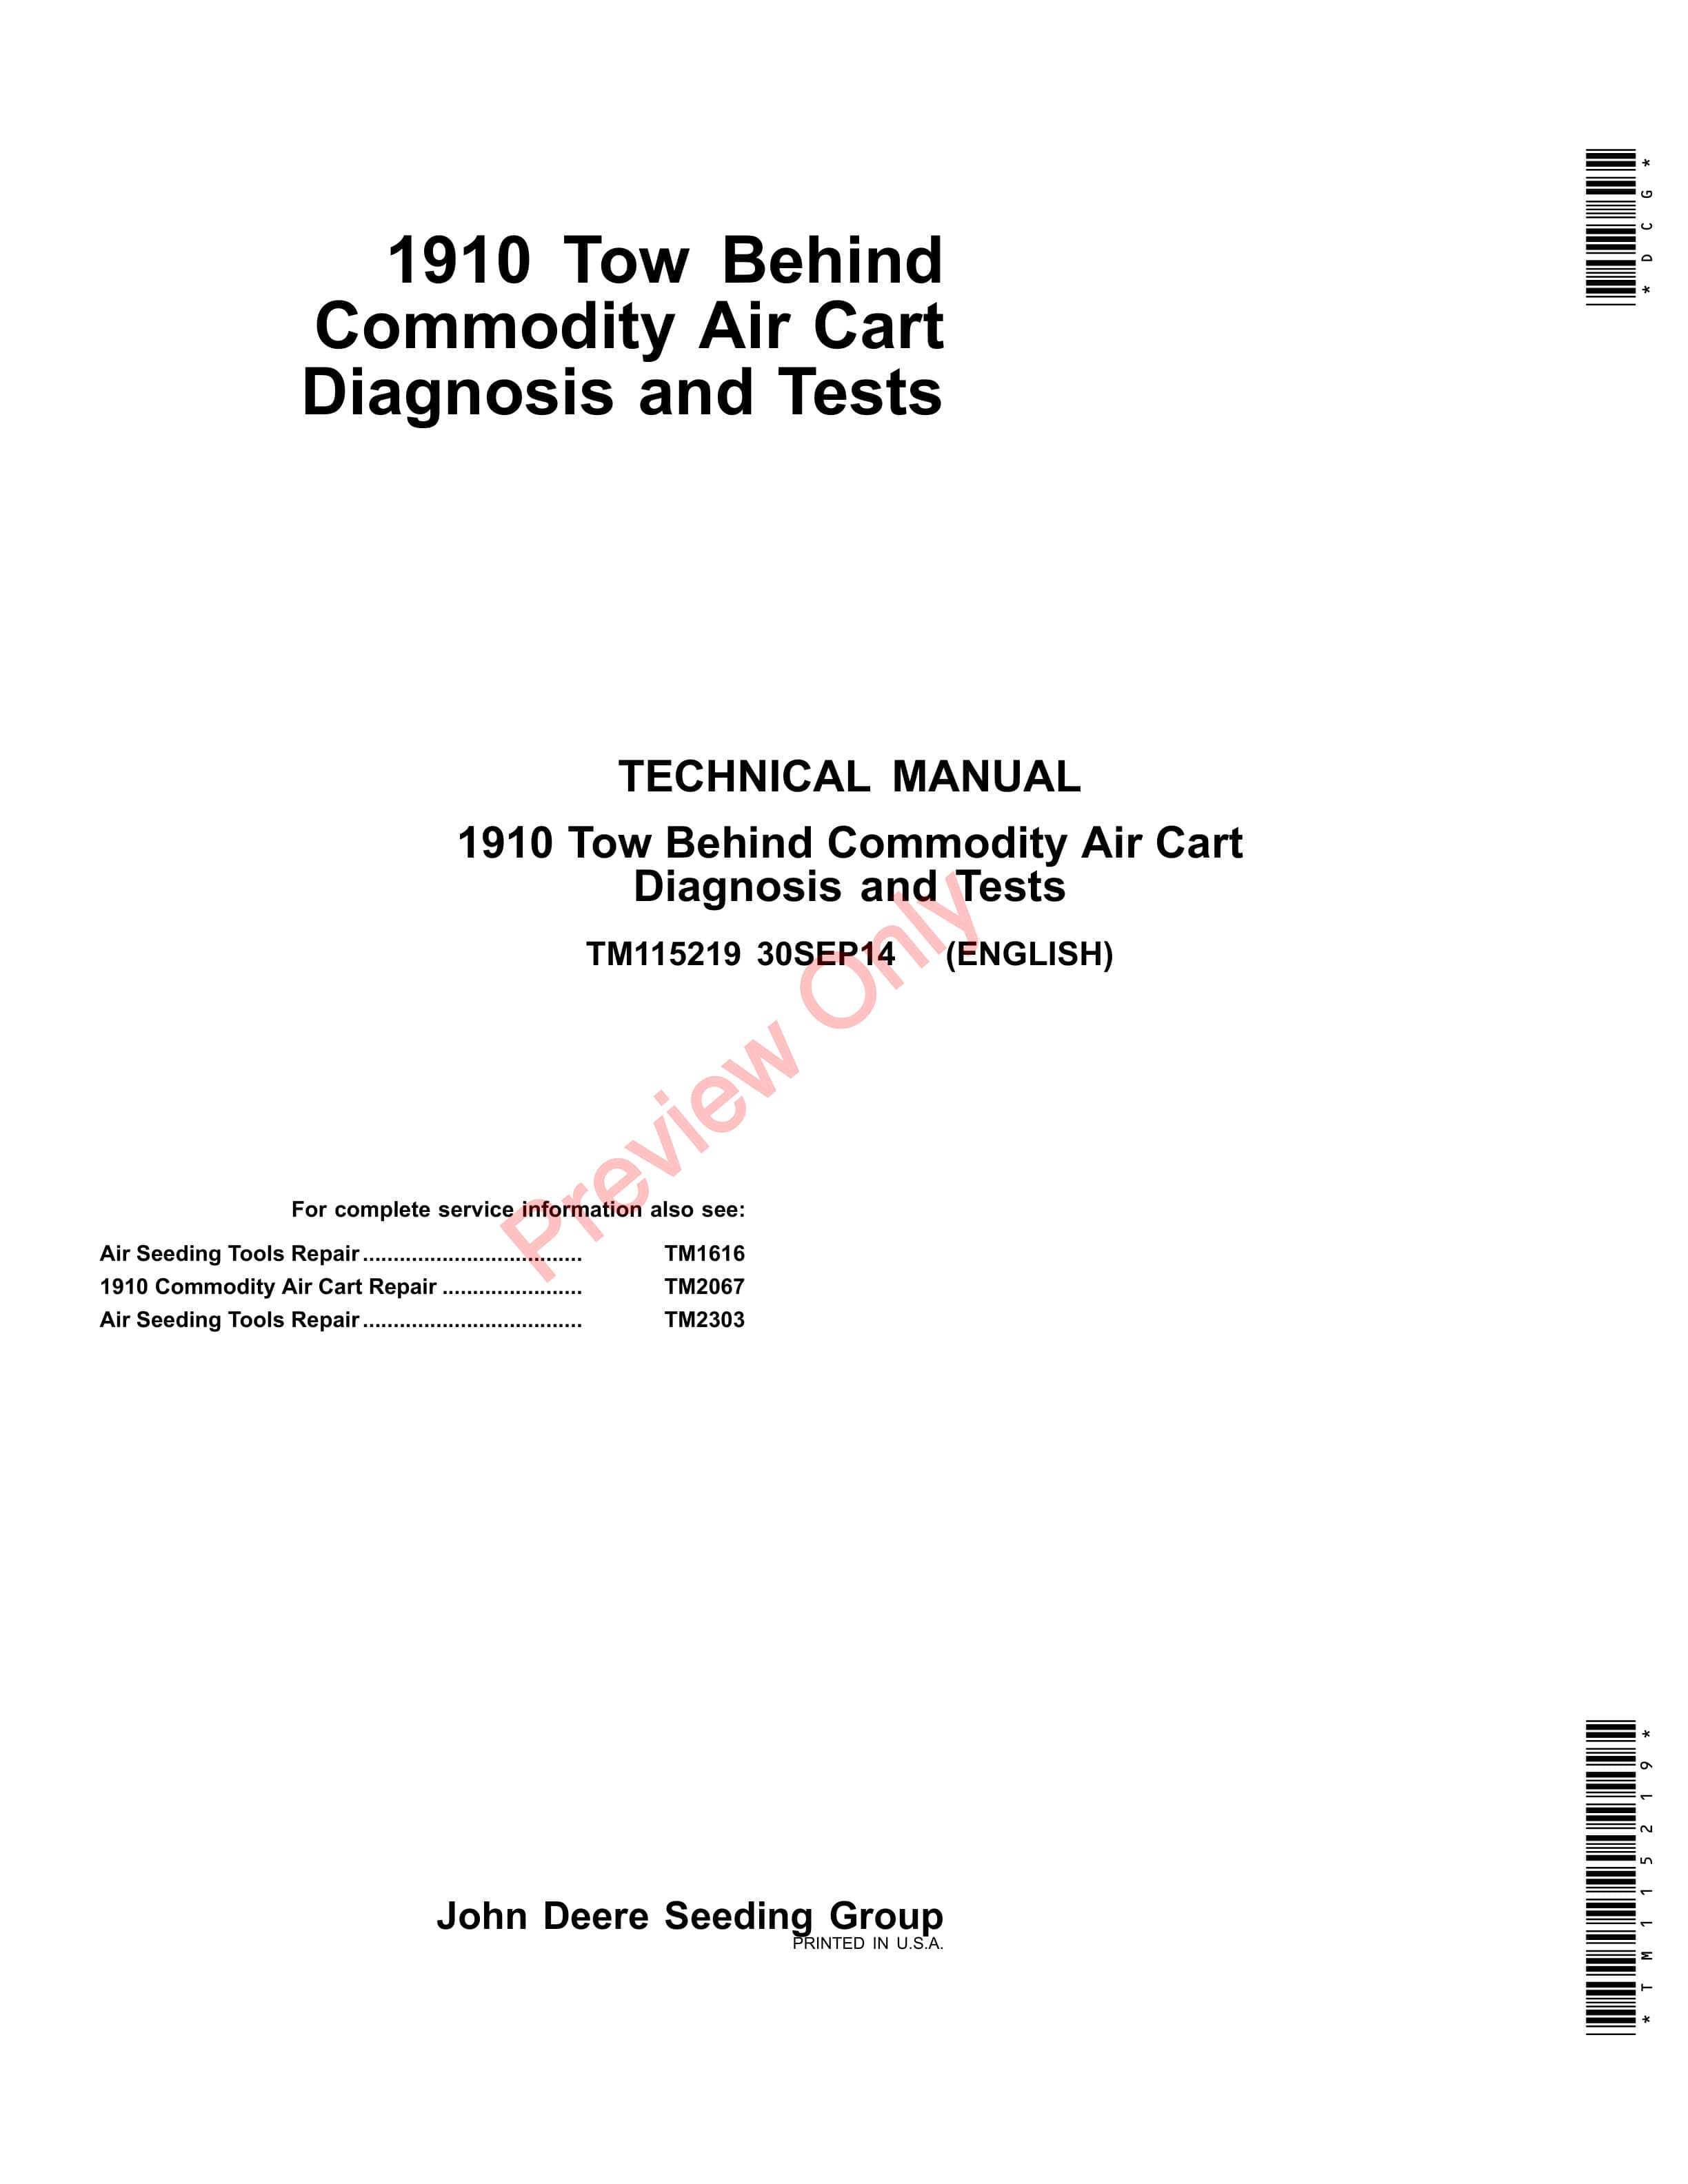 John Deere 1910 Tow-Behind Commodity Air Carts Service Information TM115219 30SEP14-1